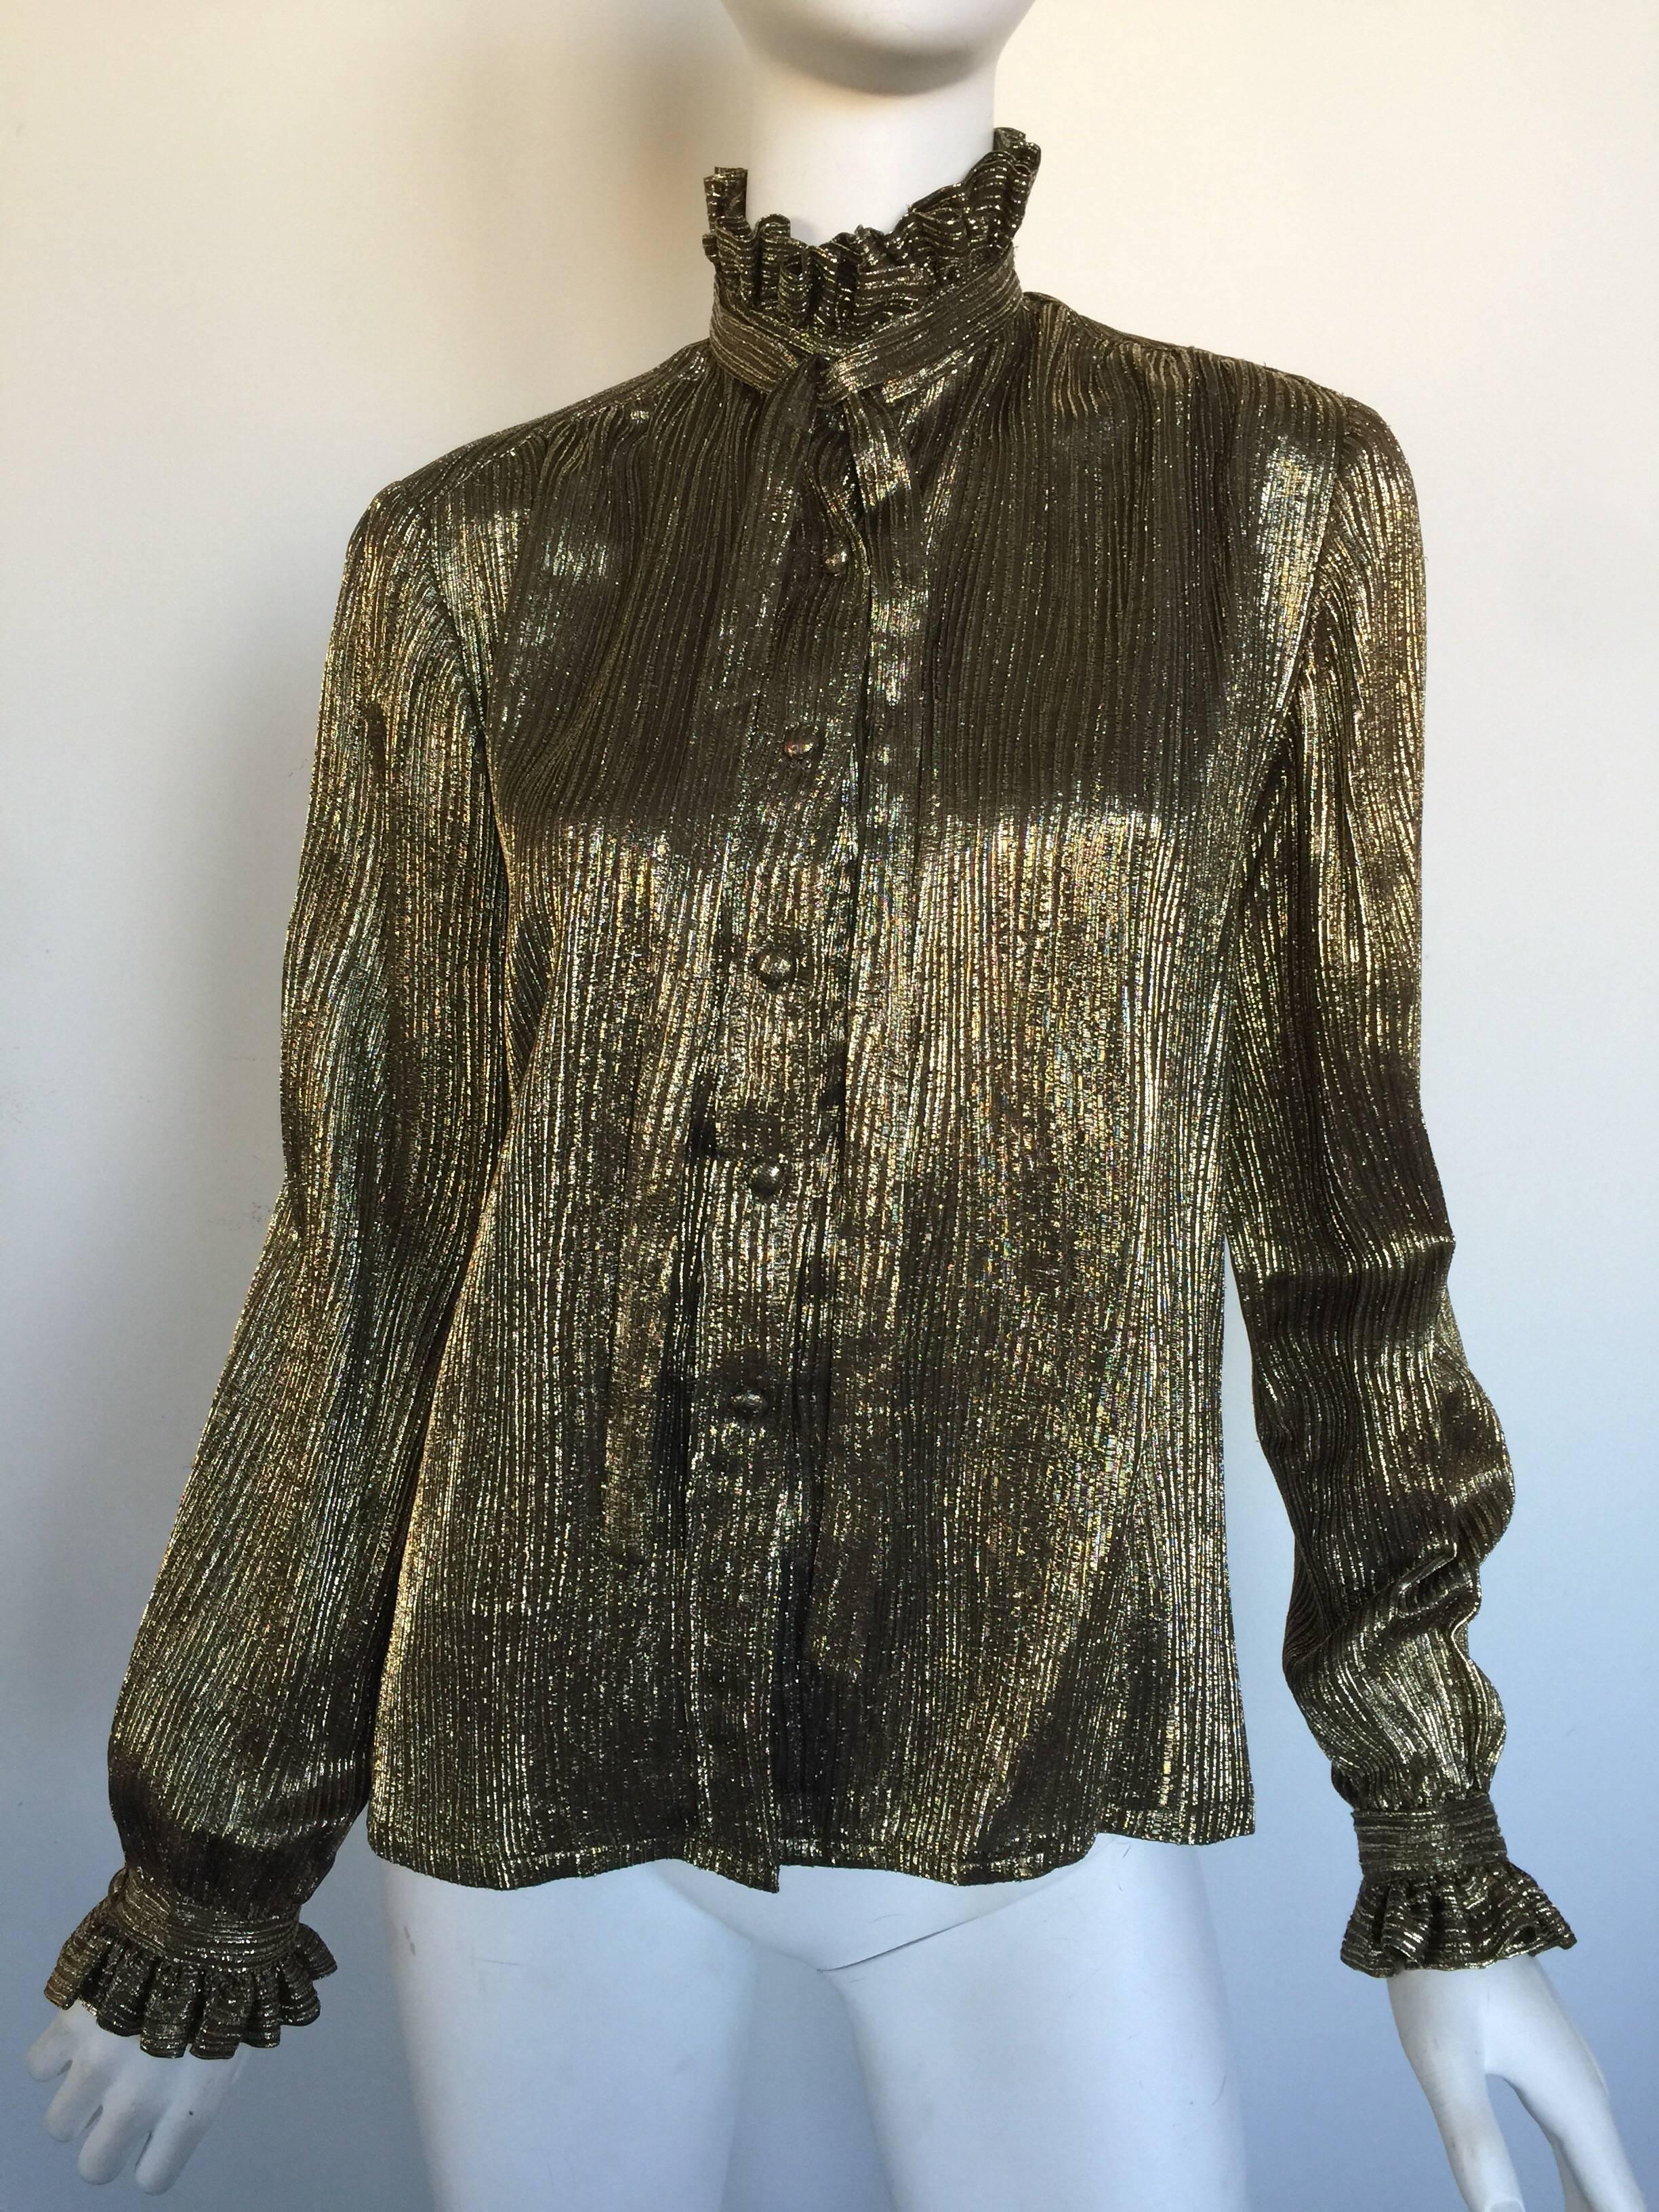 This gold metallic Adolfo blouse is 1970s for Saks Fifth Avenue.  It is pleated with a ruffle high neck and cuffs.  It has a matching skirt but can be purchased separately.  